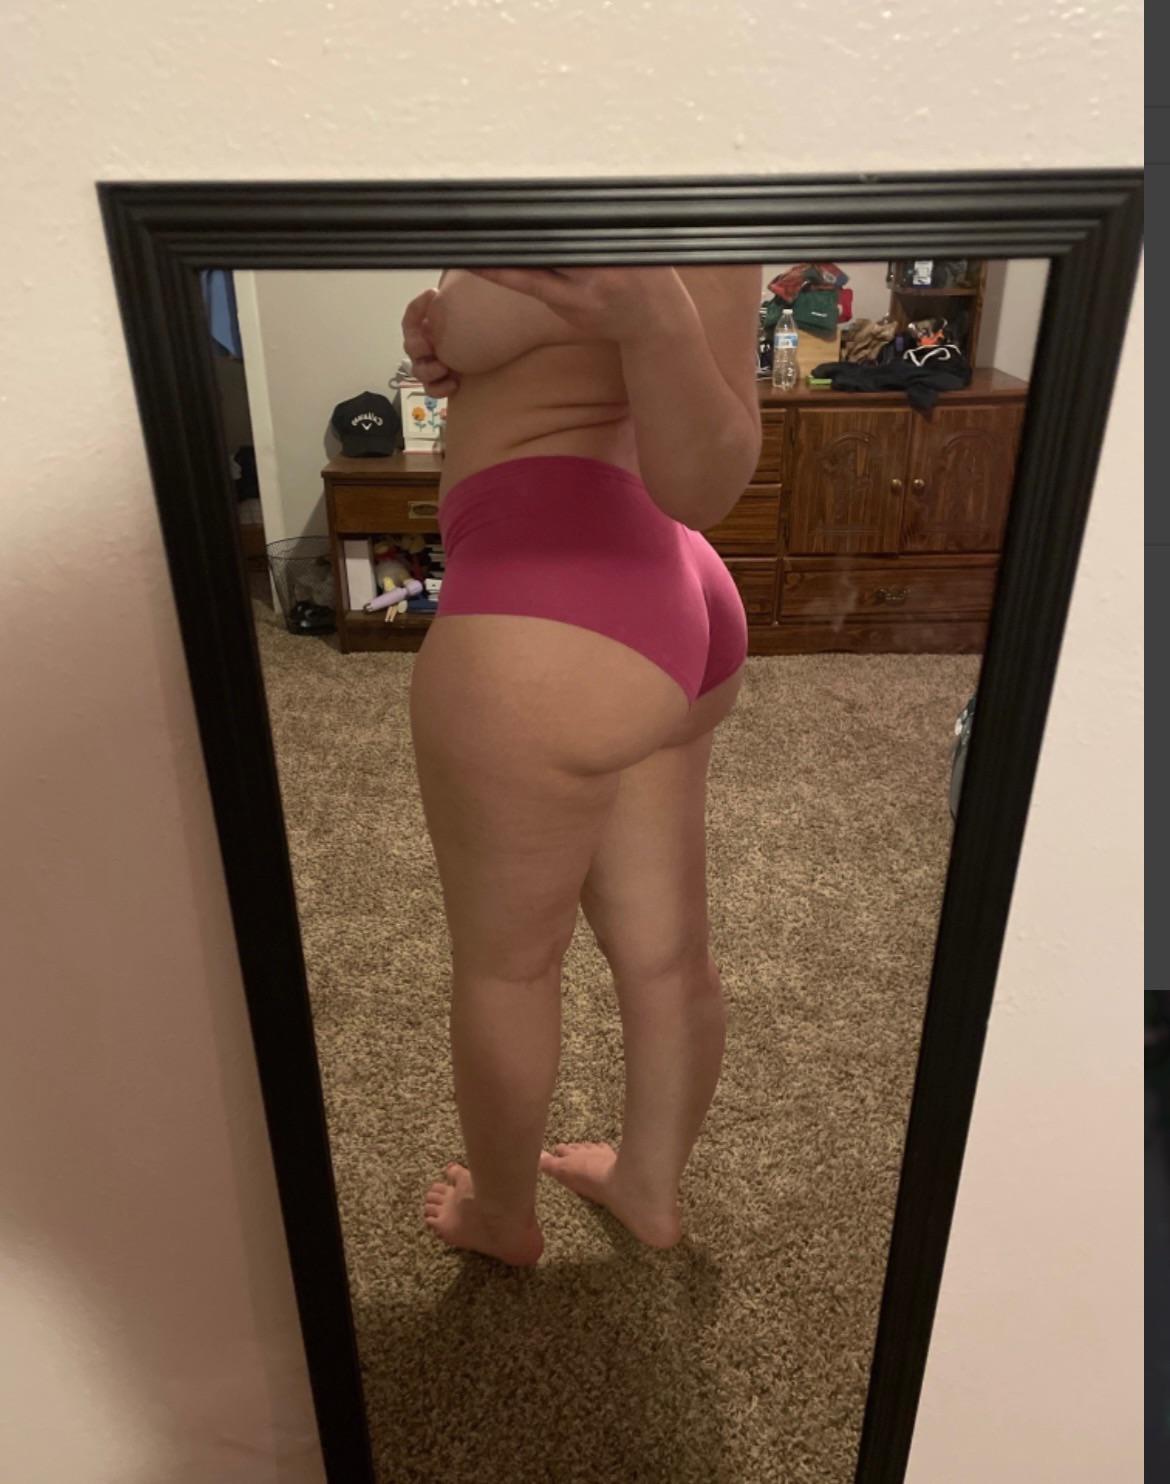 PAWG I got told I have a gravity defying ass